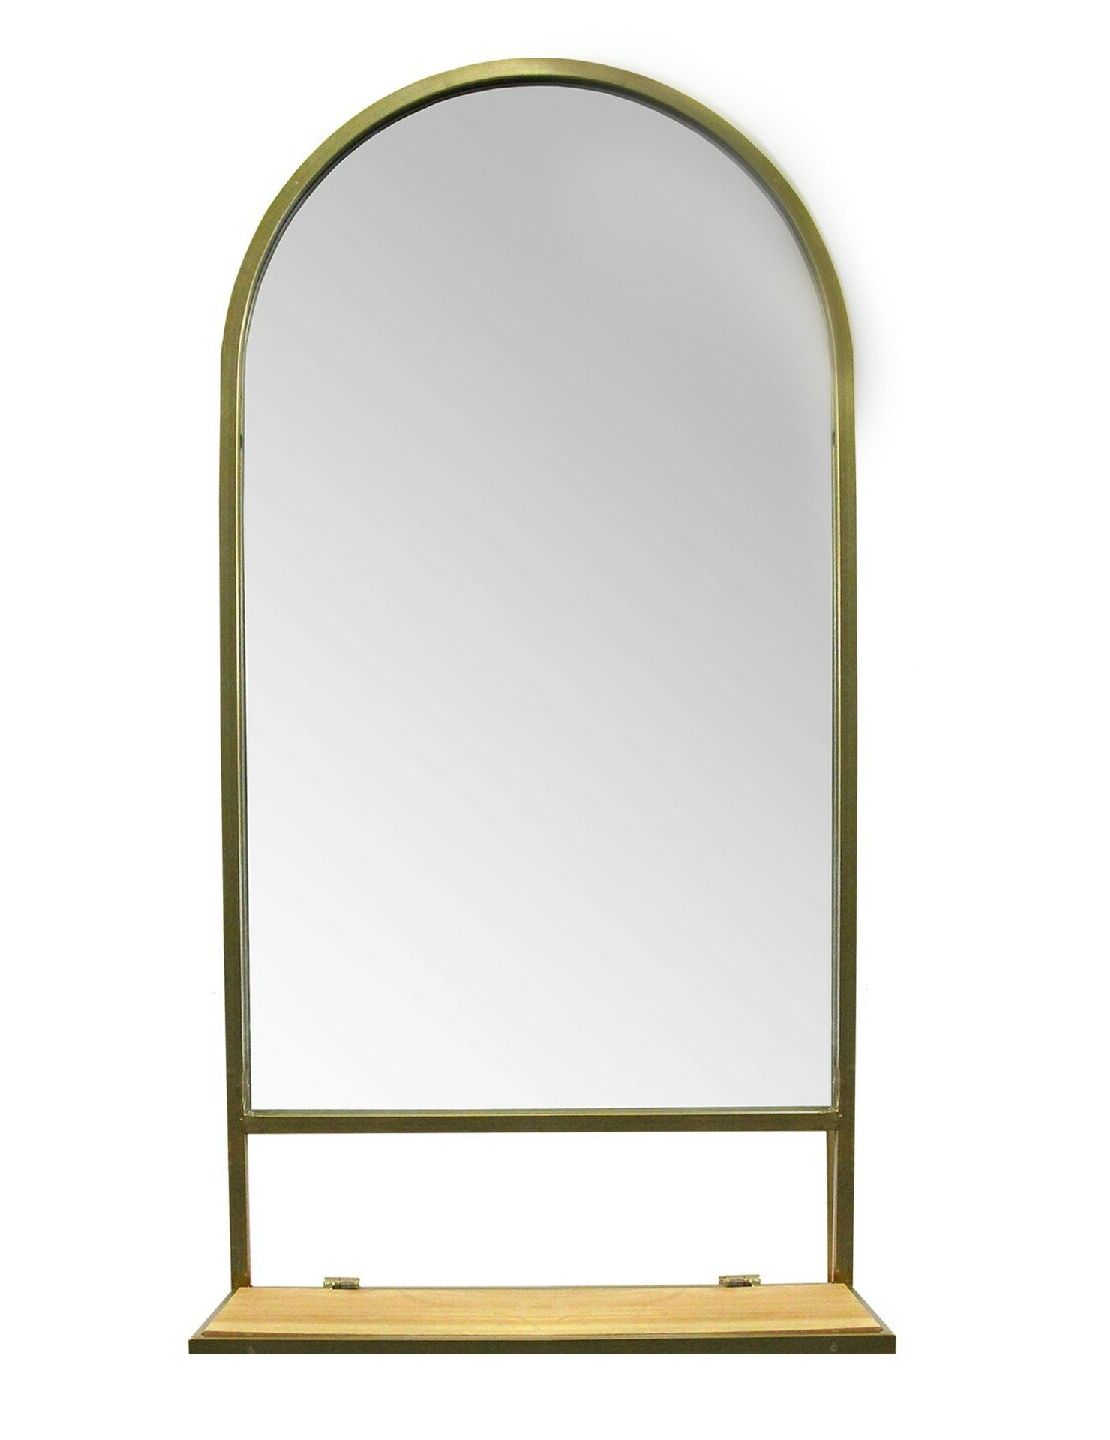 Most Recent Koeller Industrial Metal Wall Mirrors Inside Leroux Modern With Shelves Accent Mirror (View 17 of 20)